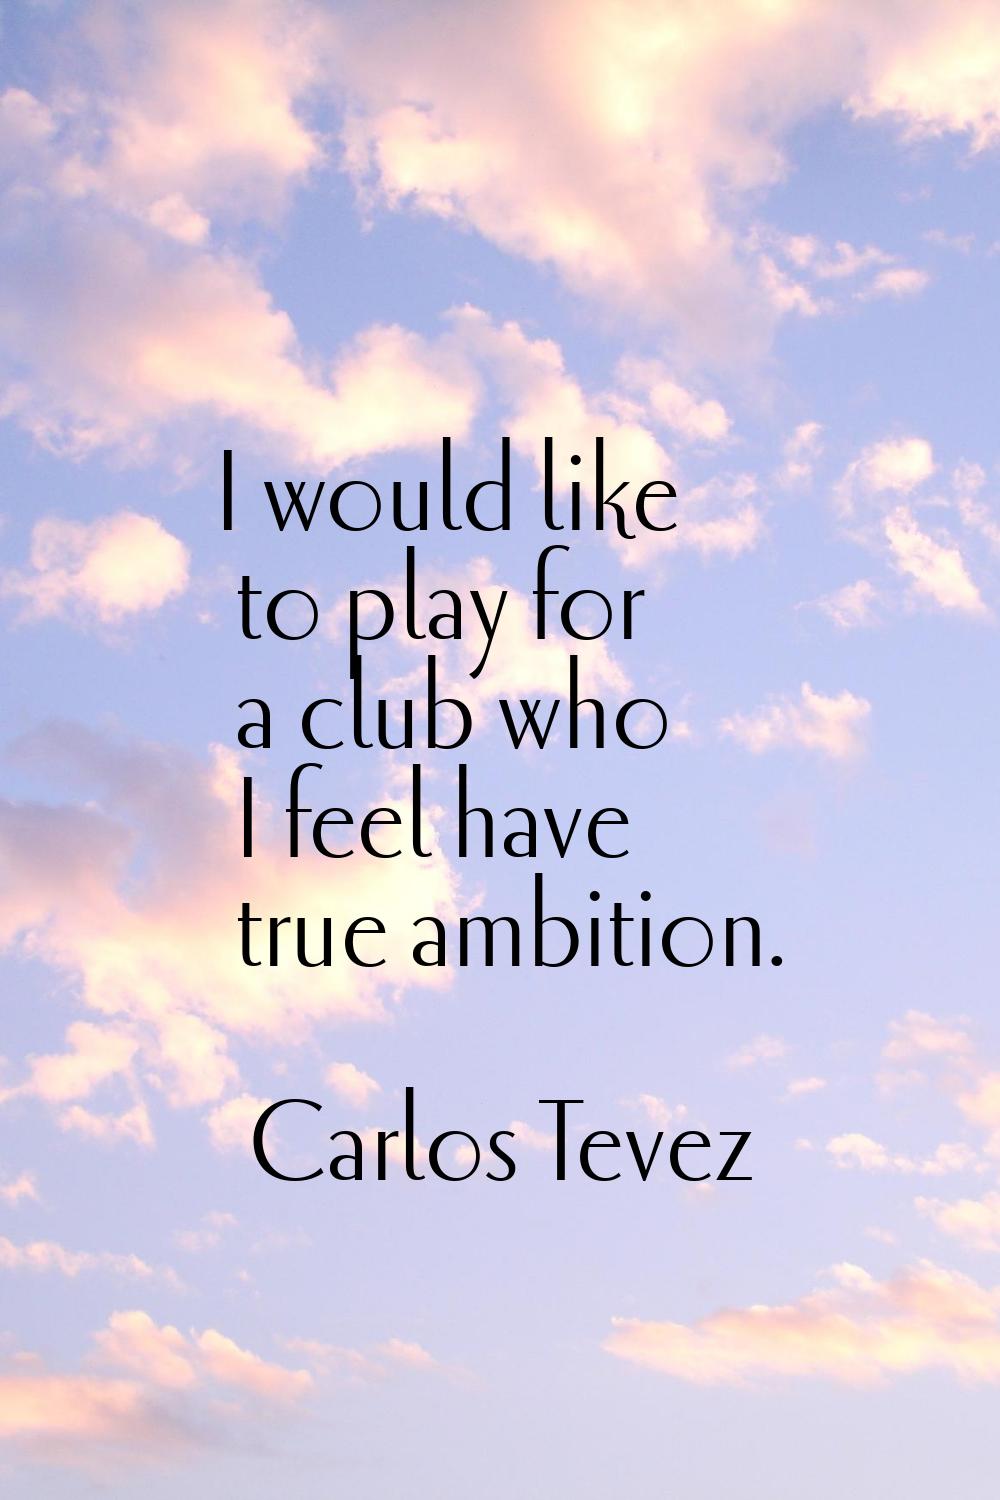 I would like to play for a club who I feel have true ambition.